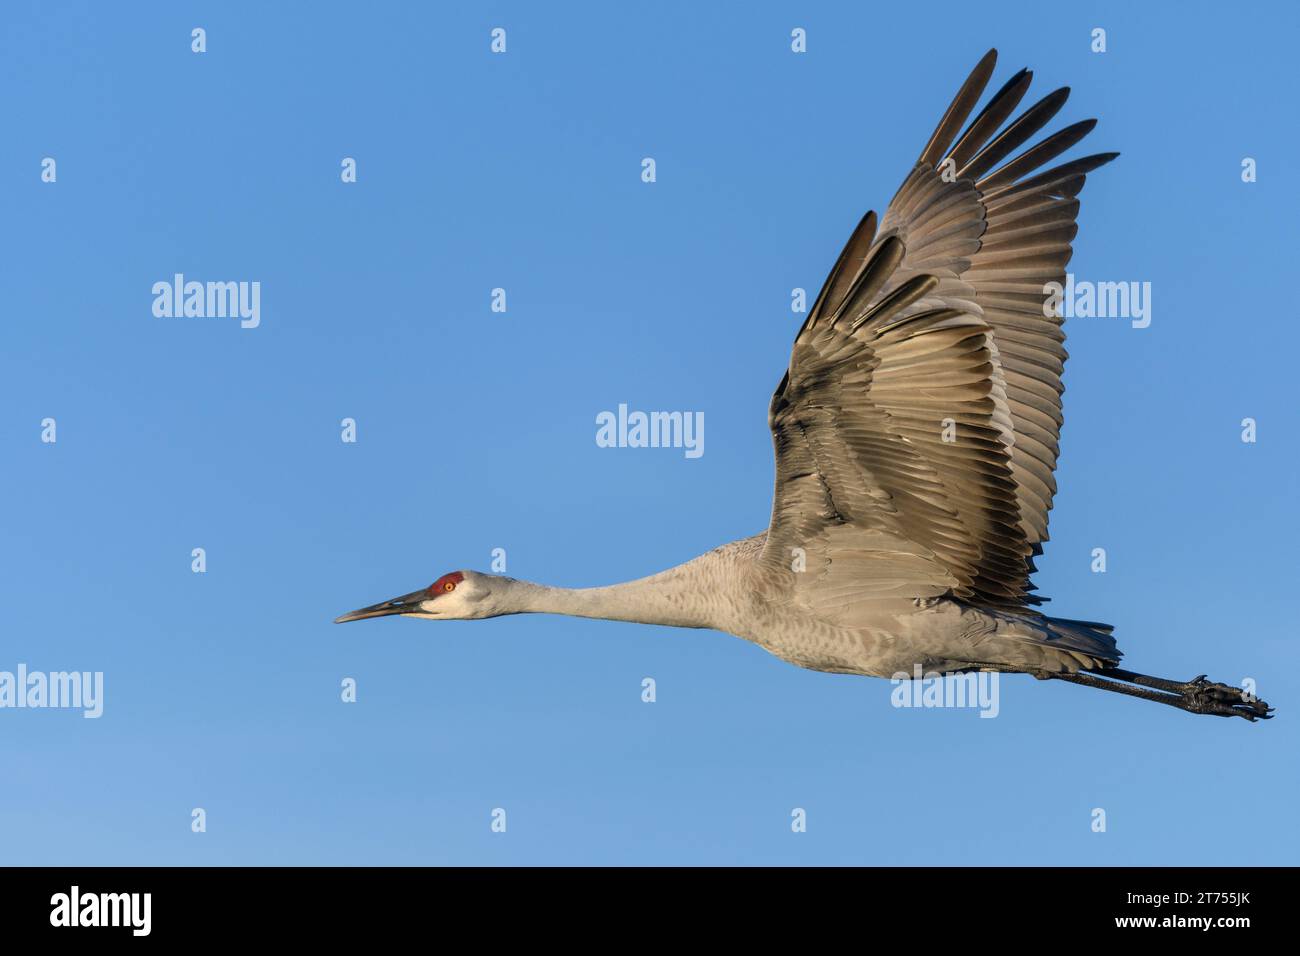 A solitary Sandhill Crane flying in profile, wings fully extended and raised, illuminated in warm sunlight with a pure blue sky in the background. Stock Photo